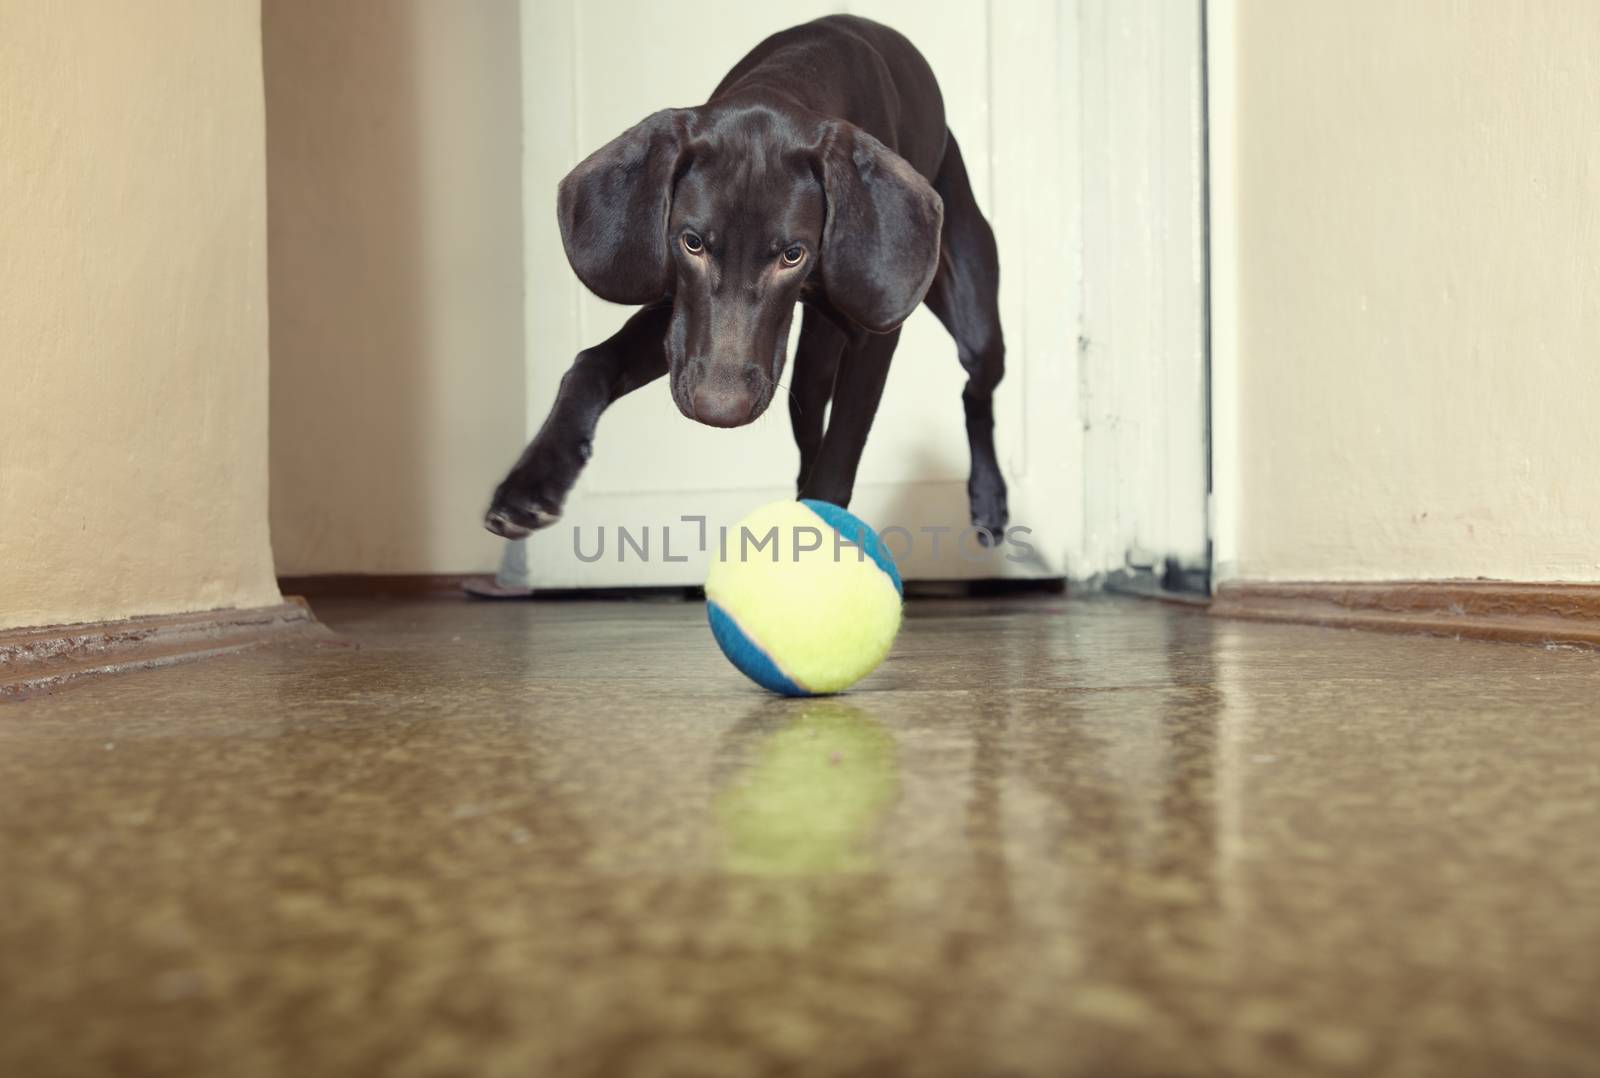 Young dog playing indoors with colorful tennis ball. Natural light and colors